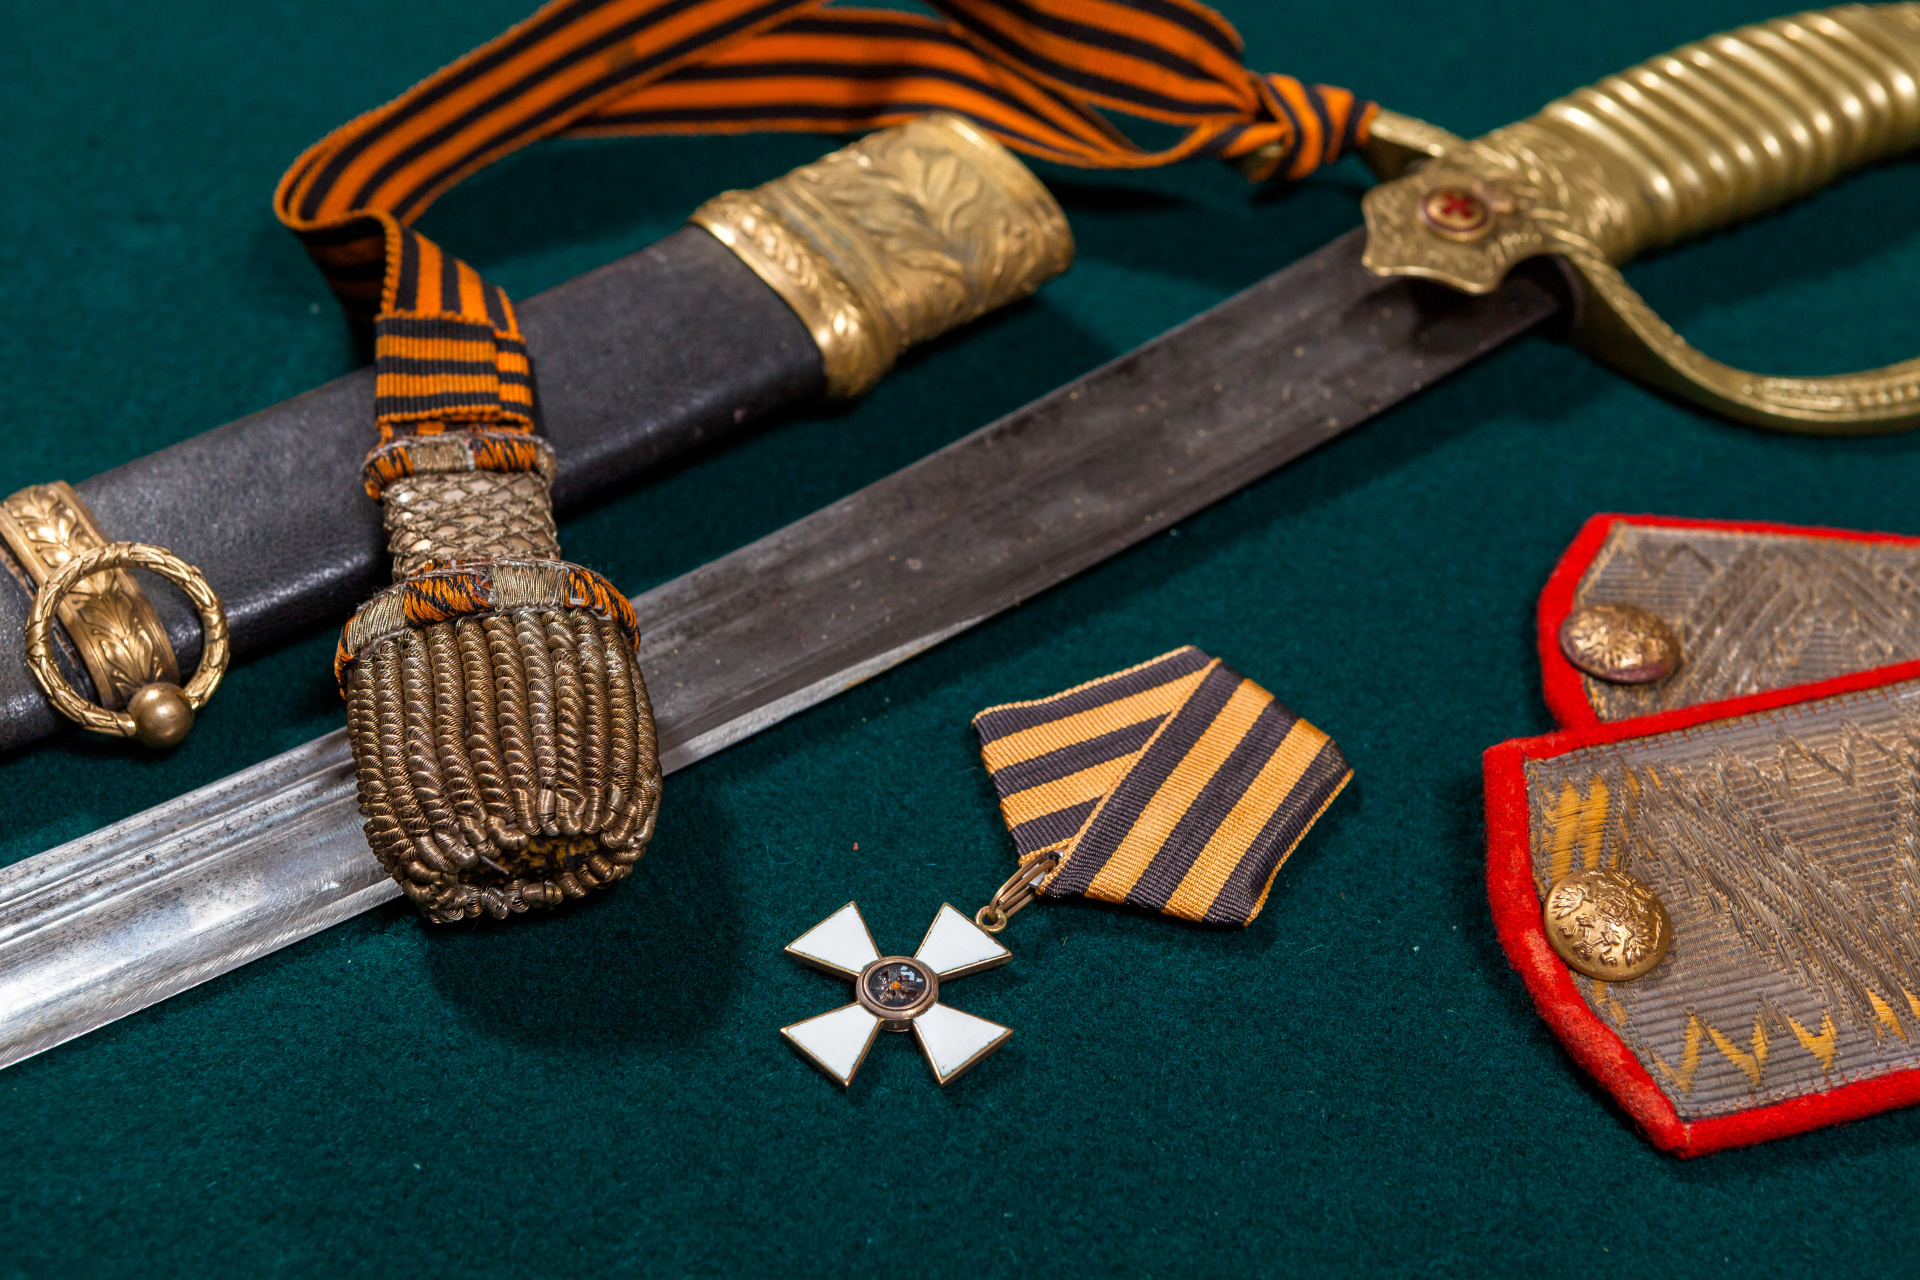 Awards, uniforms and weapons